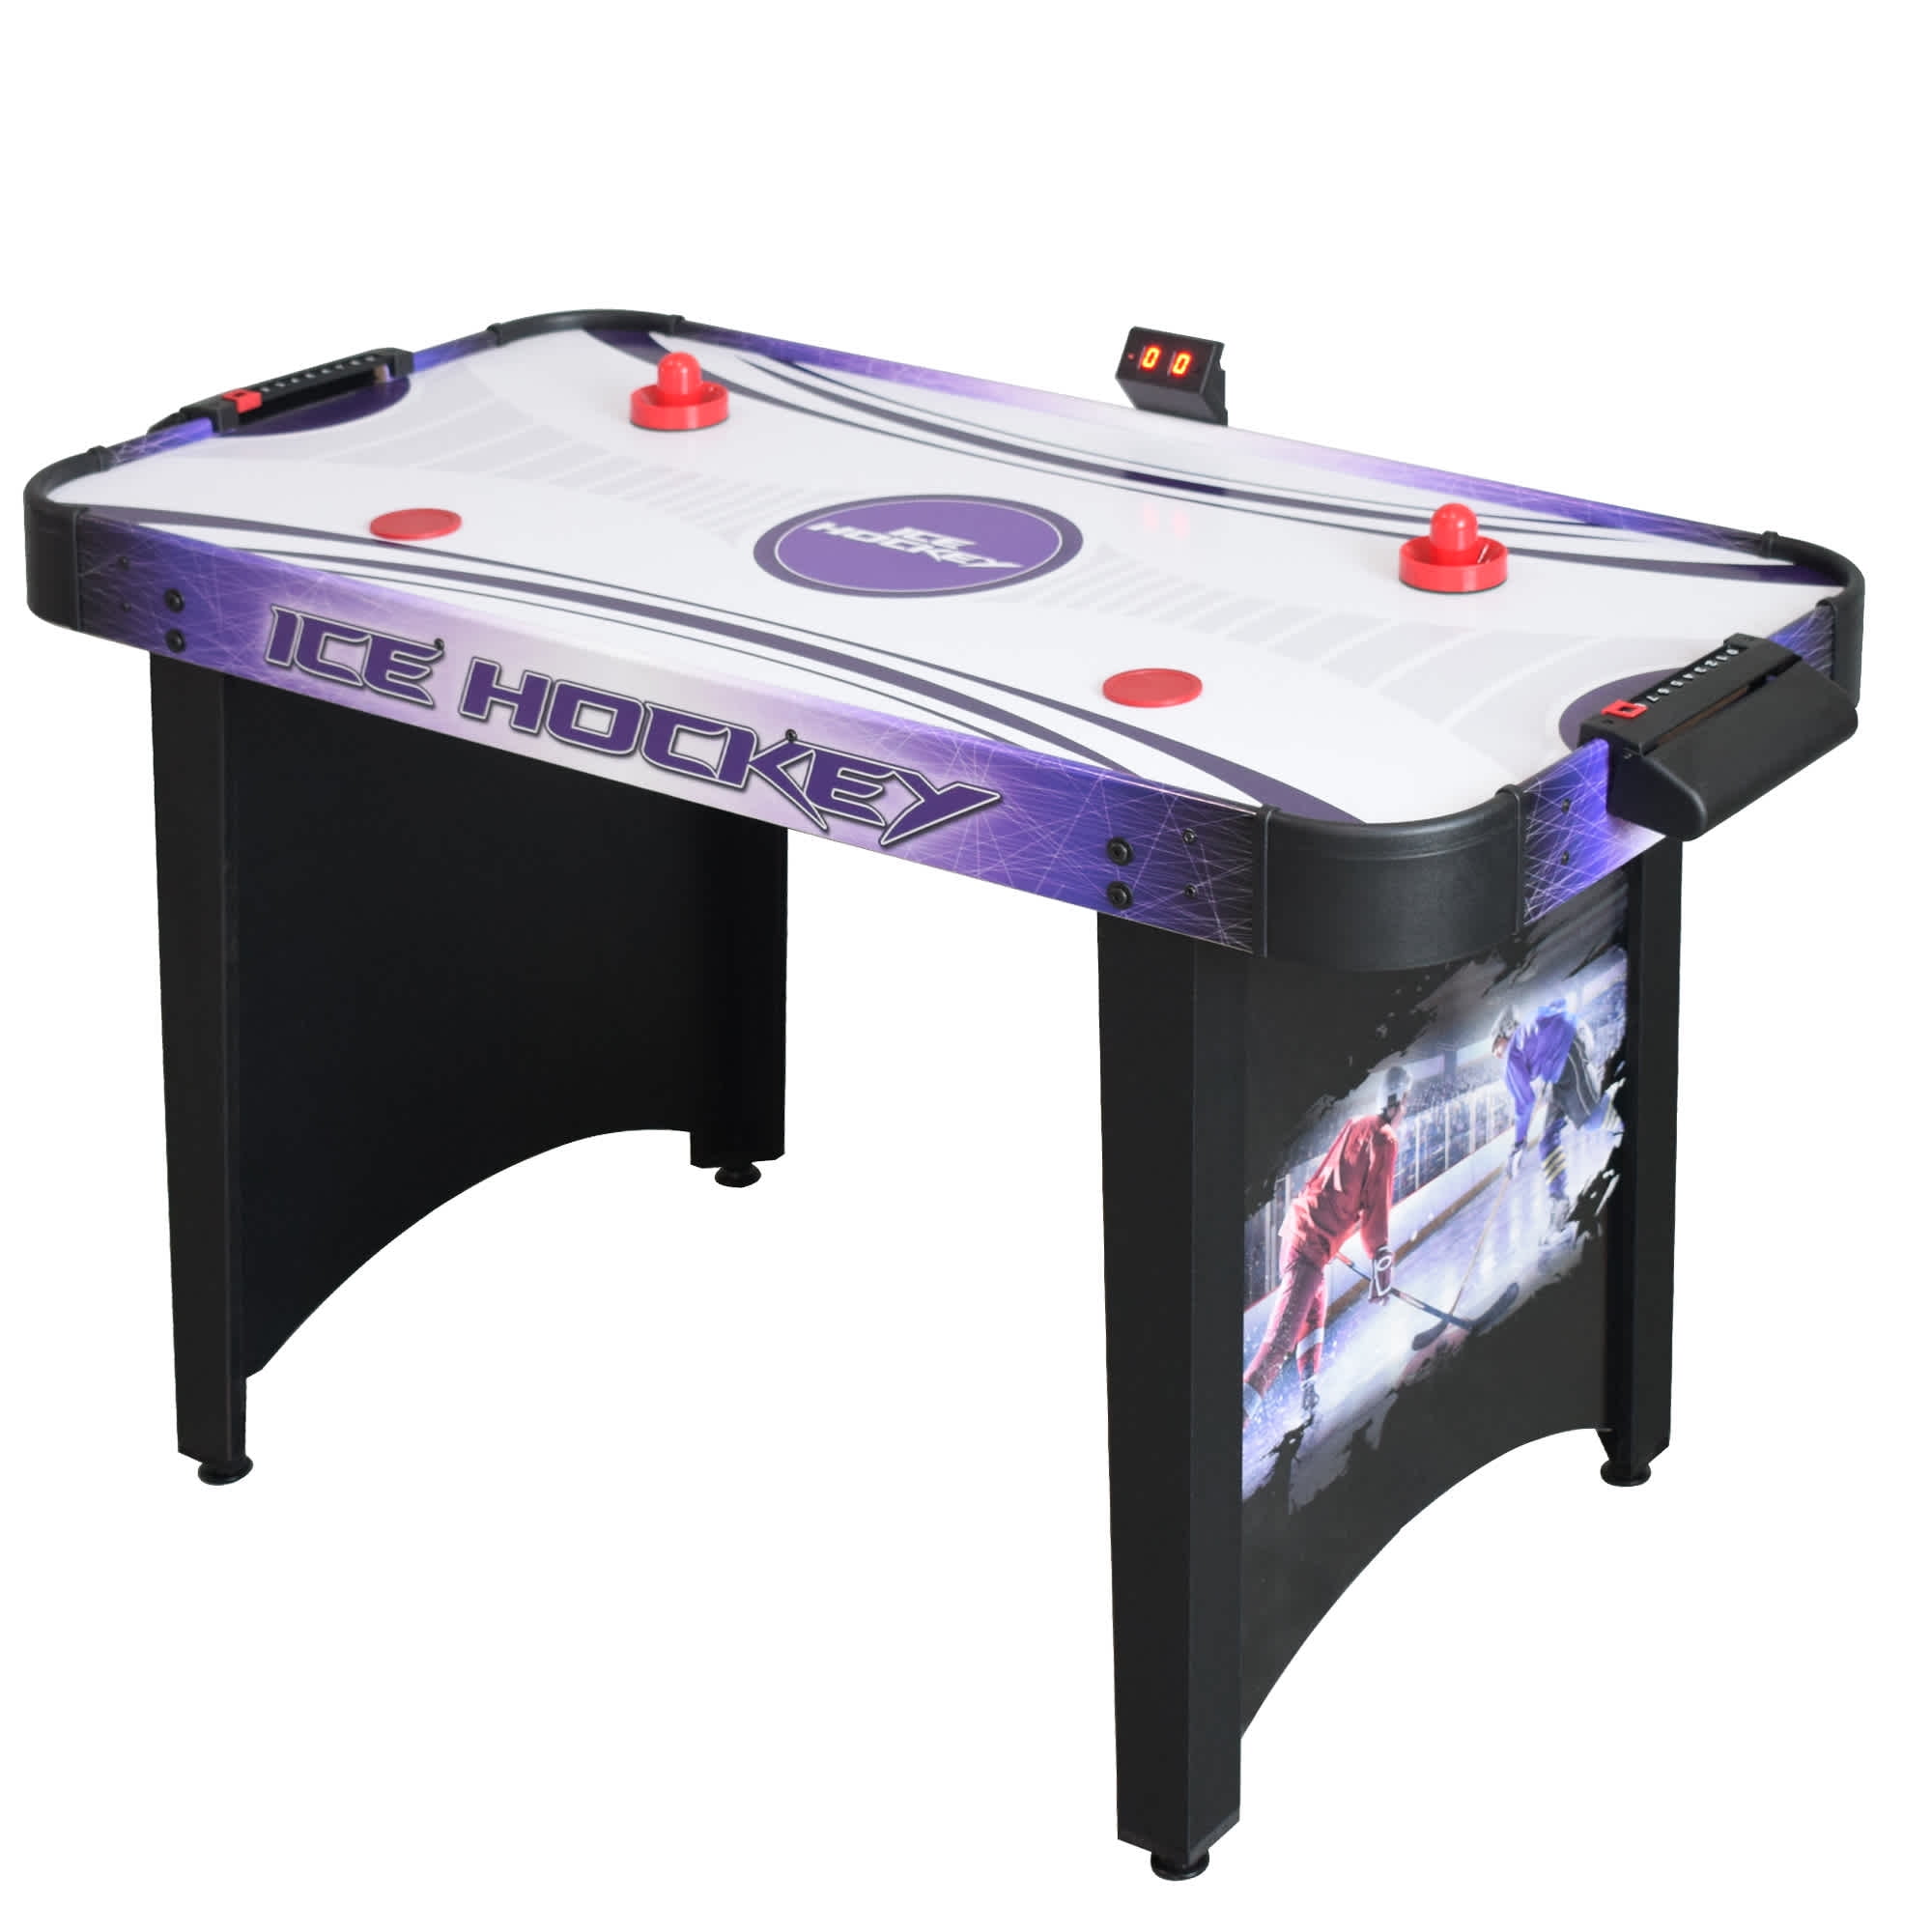 Hathaway Pro Series Air Hockey Striker and Puck Set for sale online 